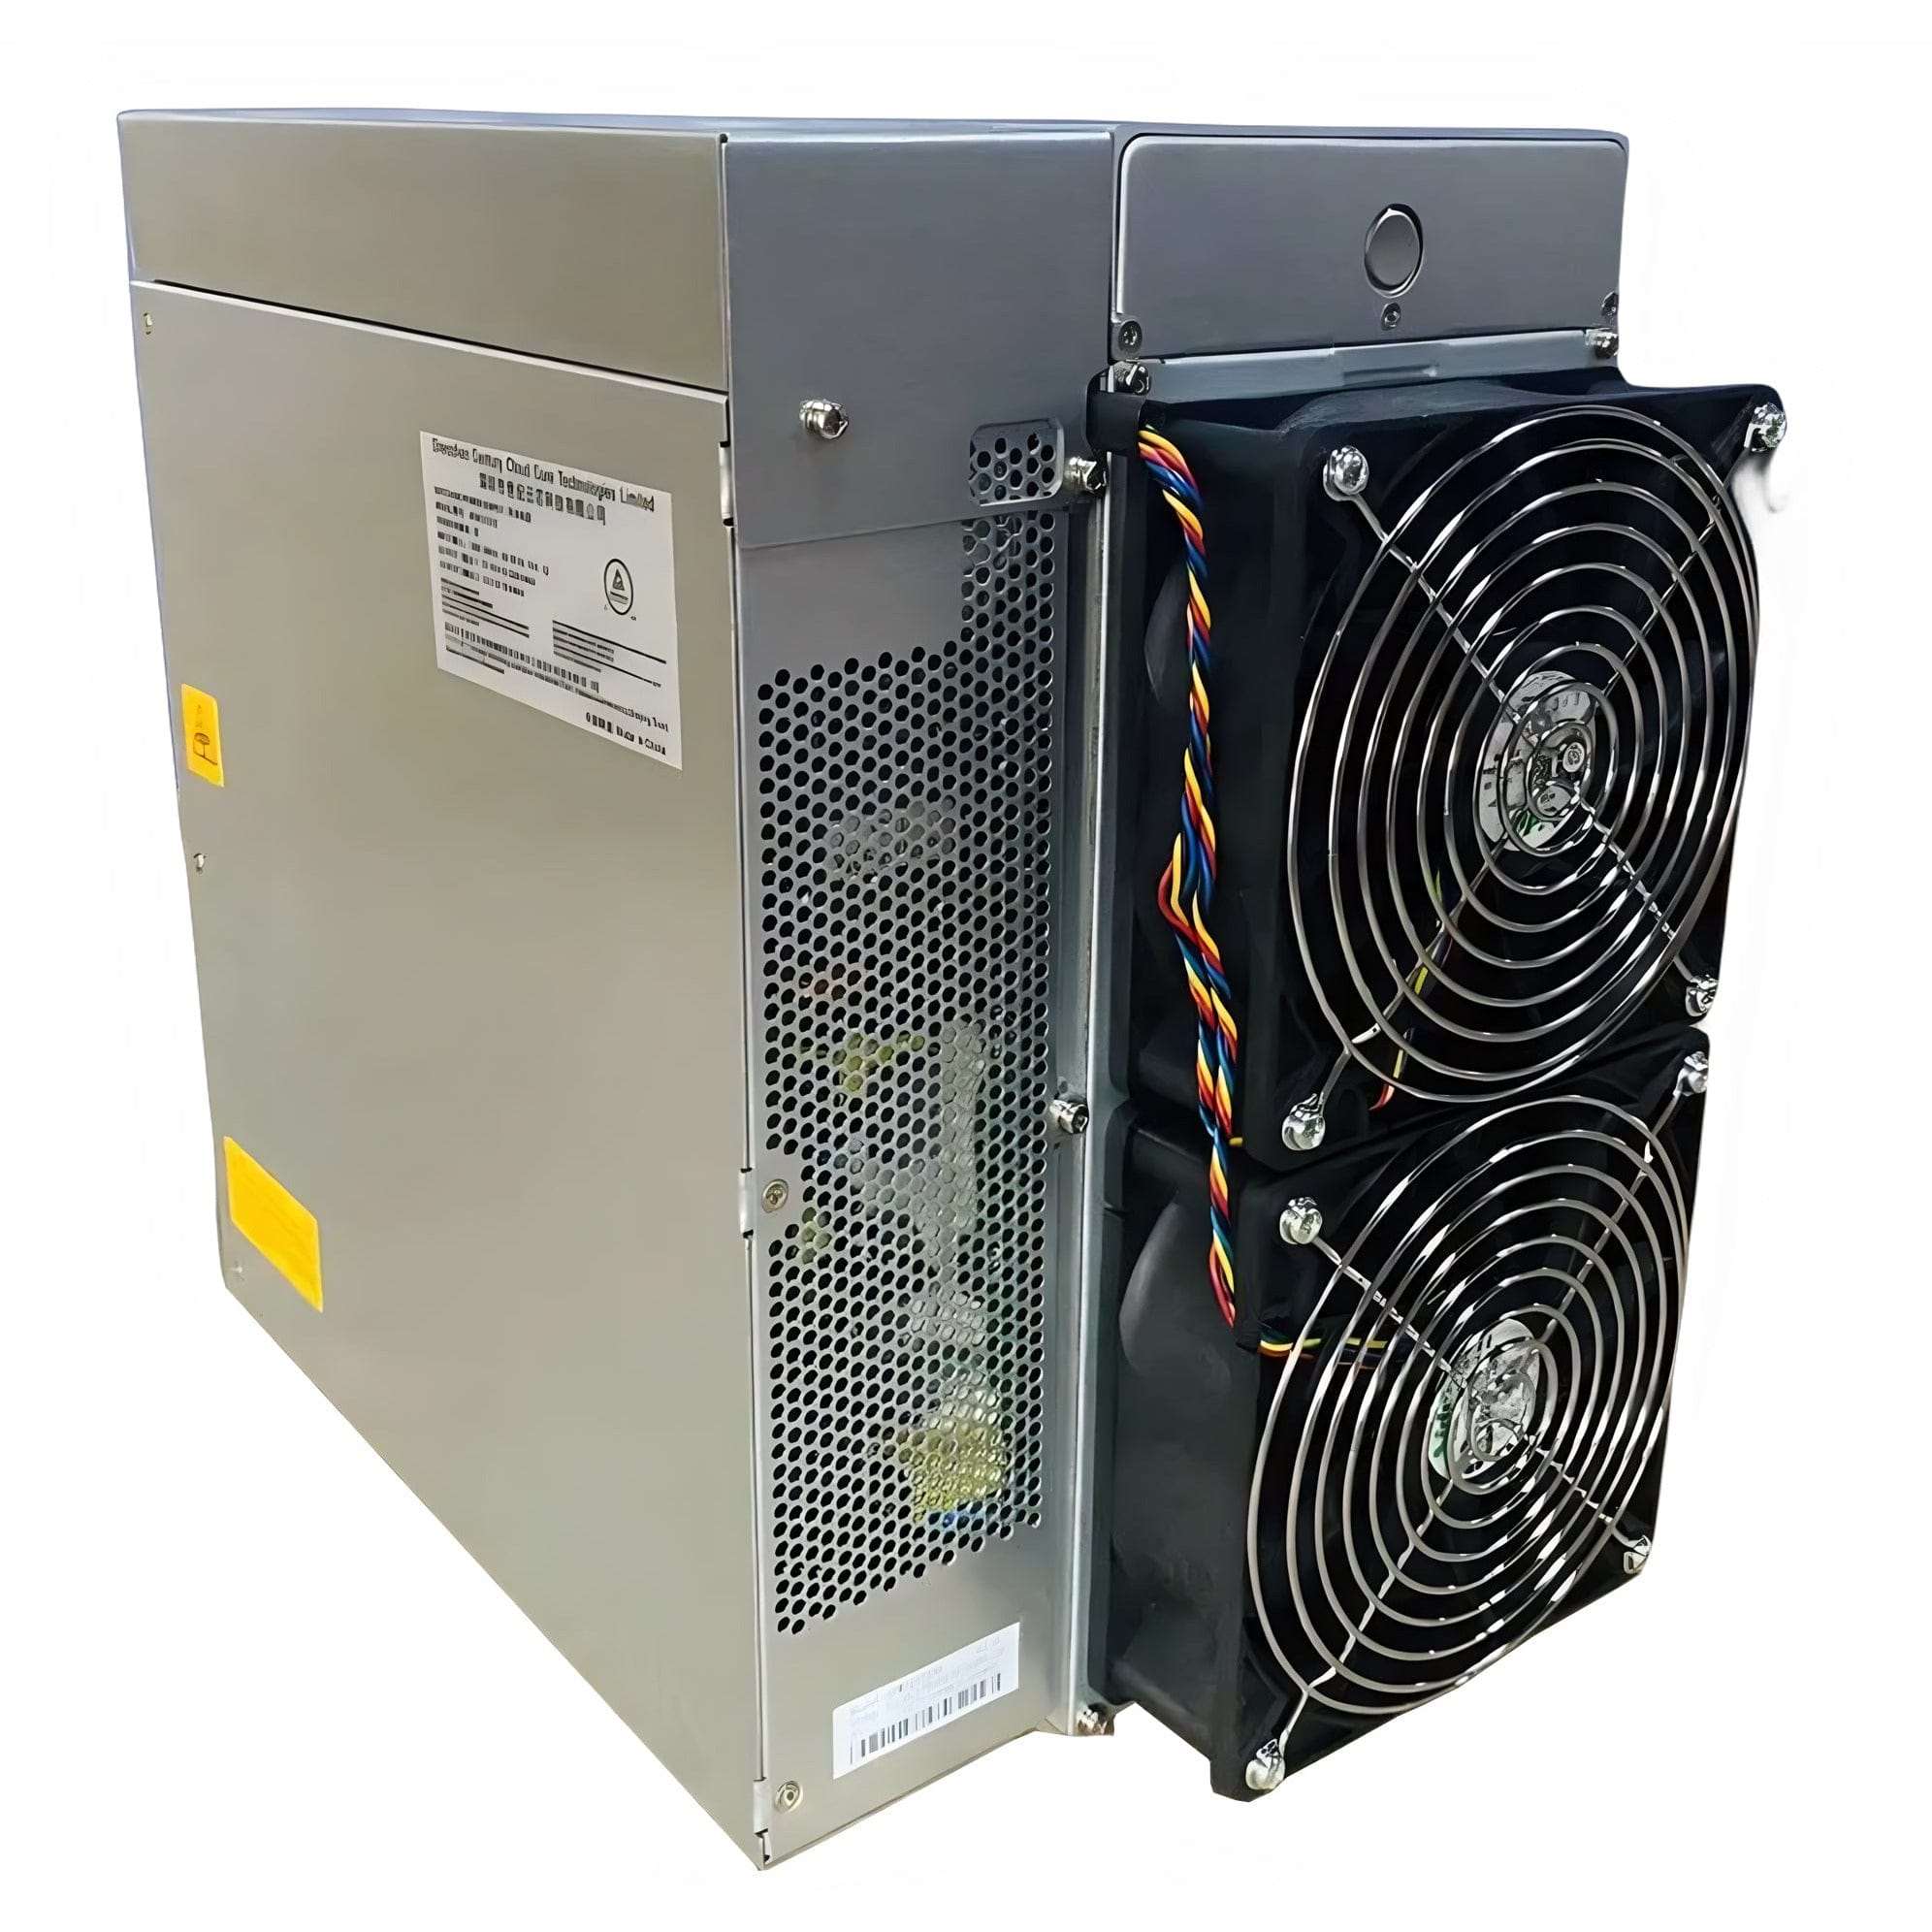 Antminer S19k Pro and S19 Profitability Guide